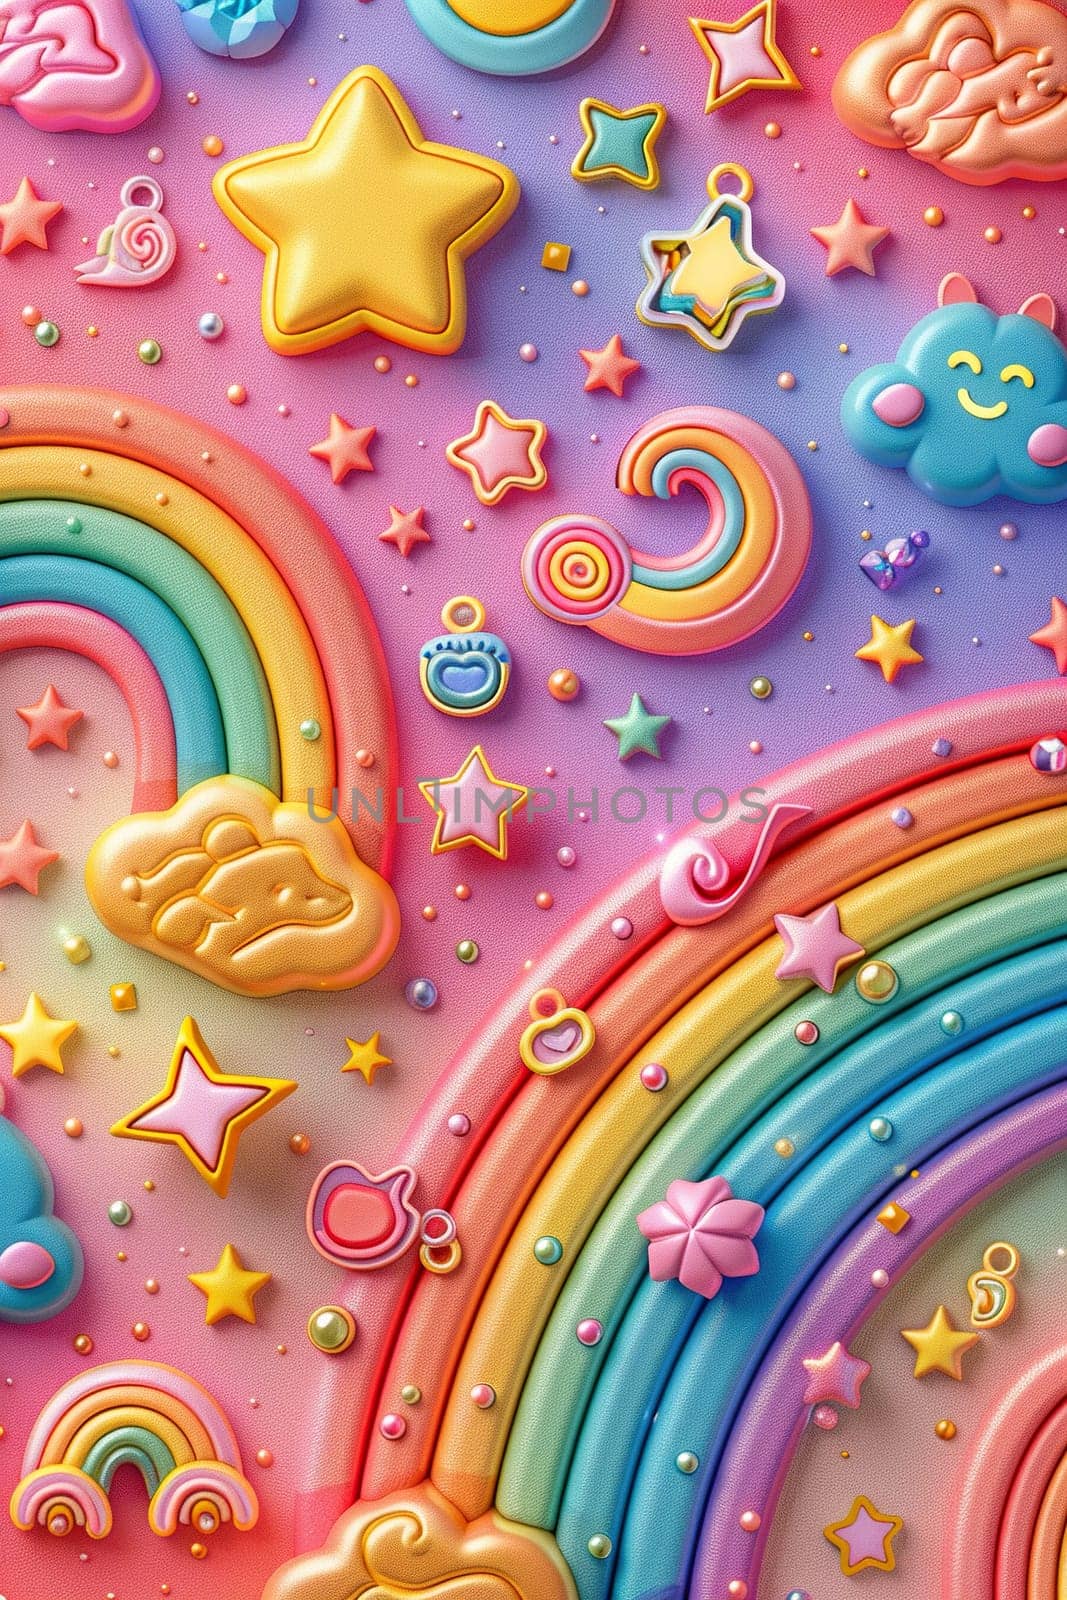 Illustration in 3D style with rainbow, stars and clouds. Vertical cartoon background for tik tok, instagram, stories. Generated by artificial intelligence by Vovmar